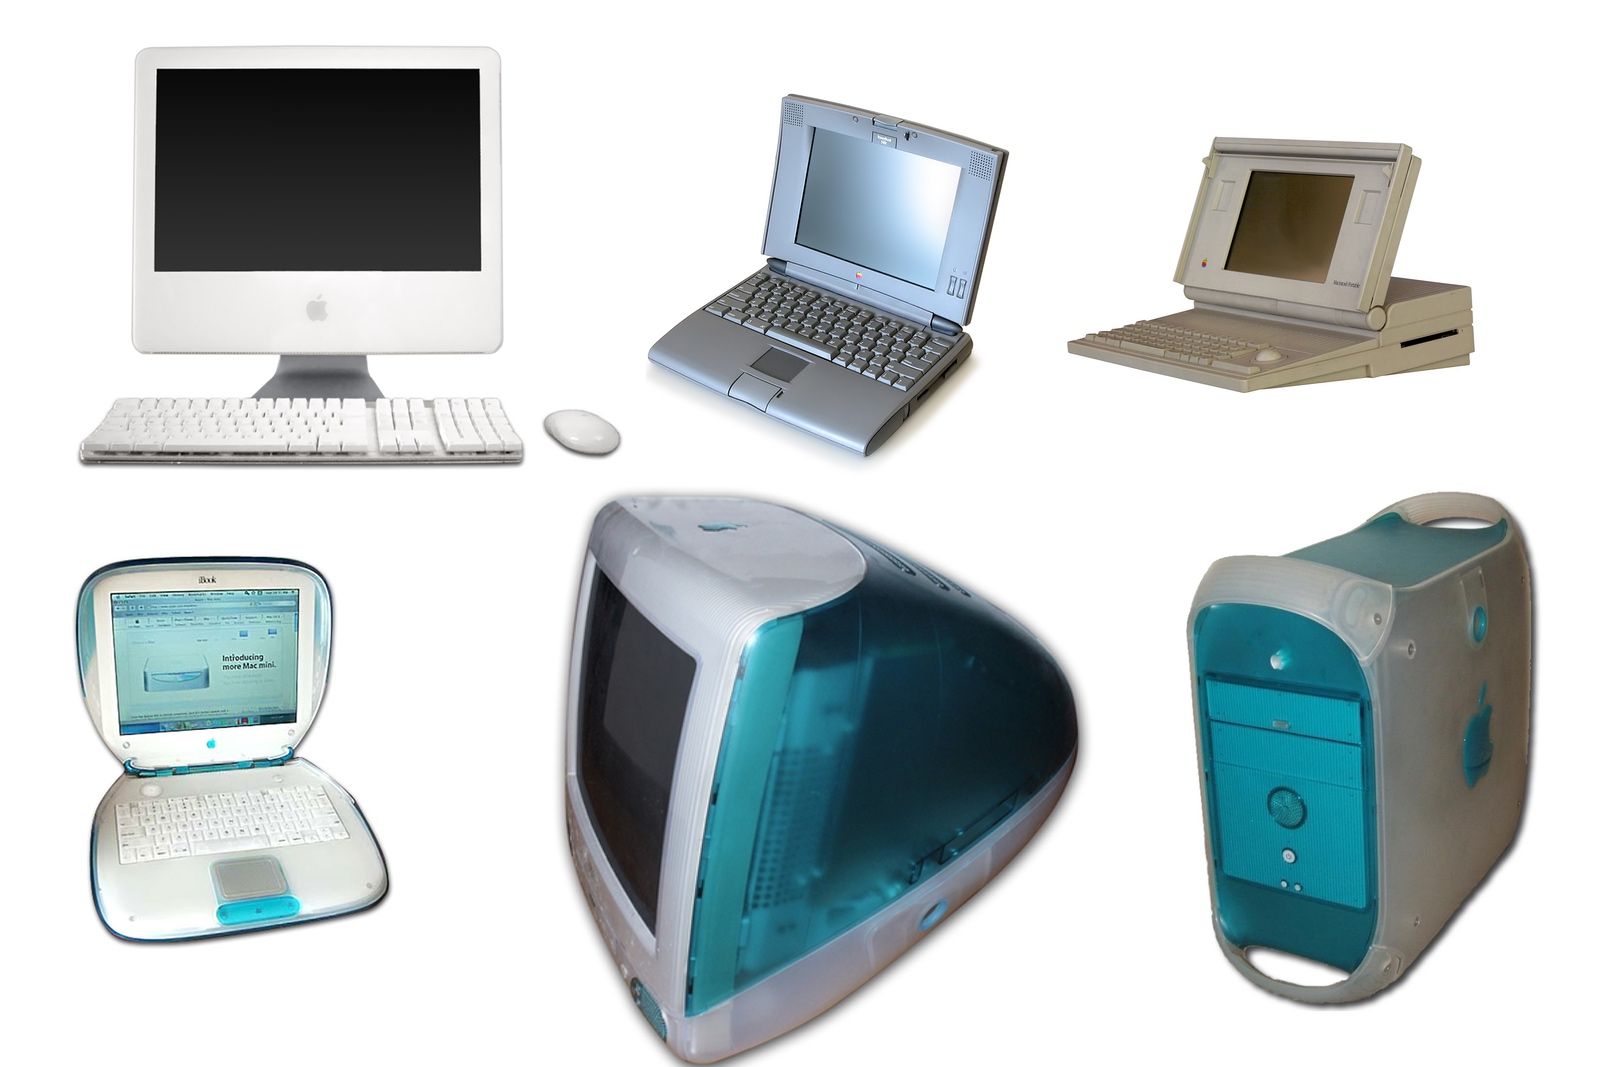 Historic Apple Mac Computers - Walk Down Memory Lane With These Classic Machines image 1